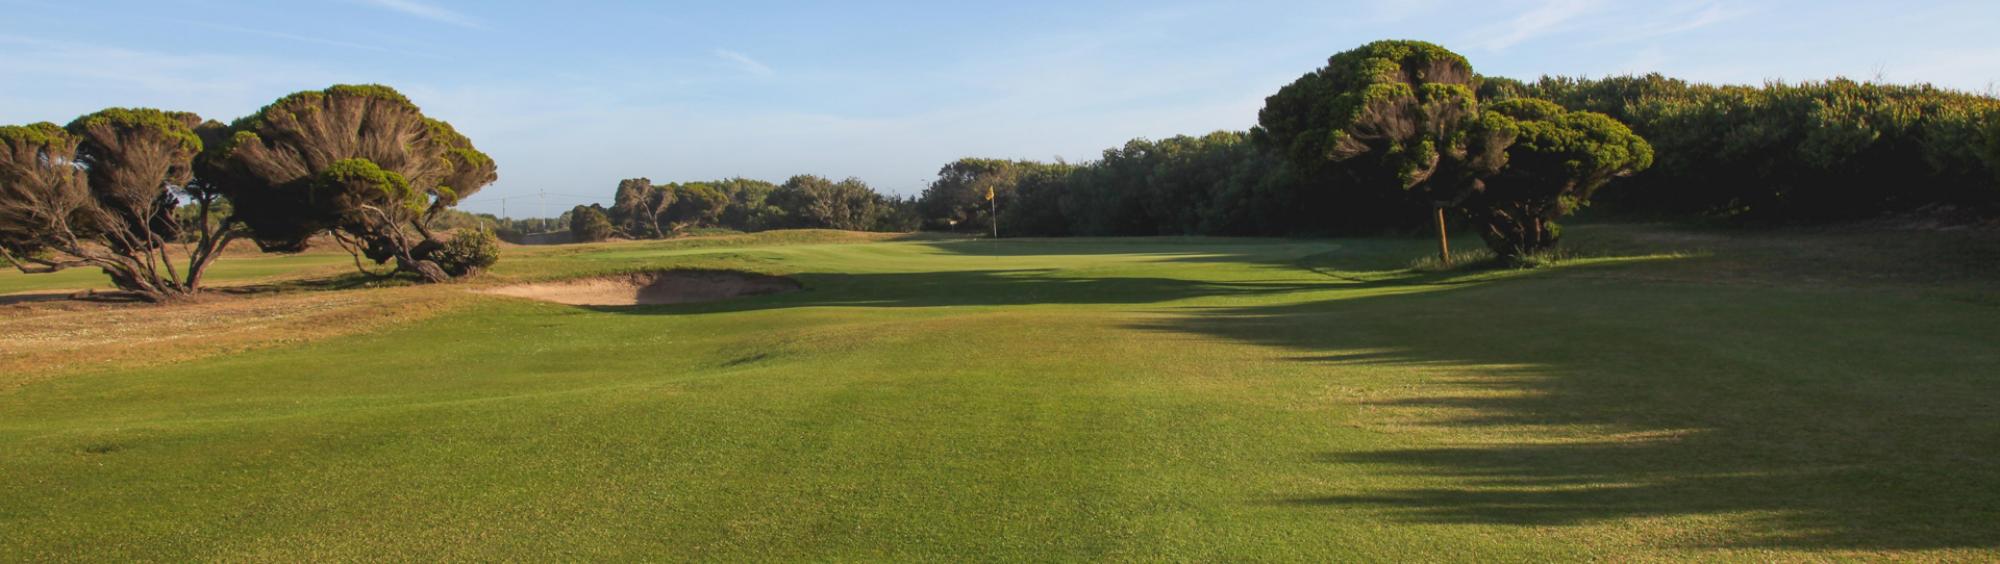 The Oporto Golf Club's picturesque green situated in incredible Porto.